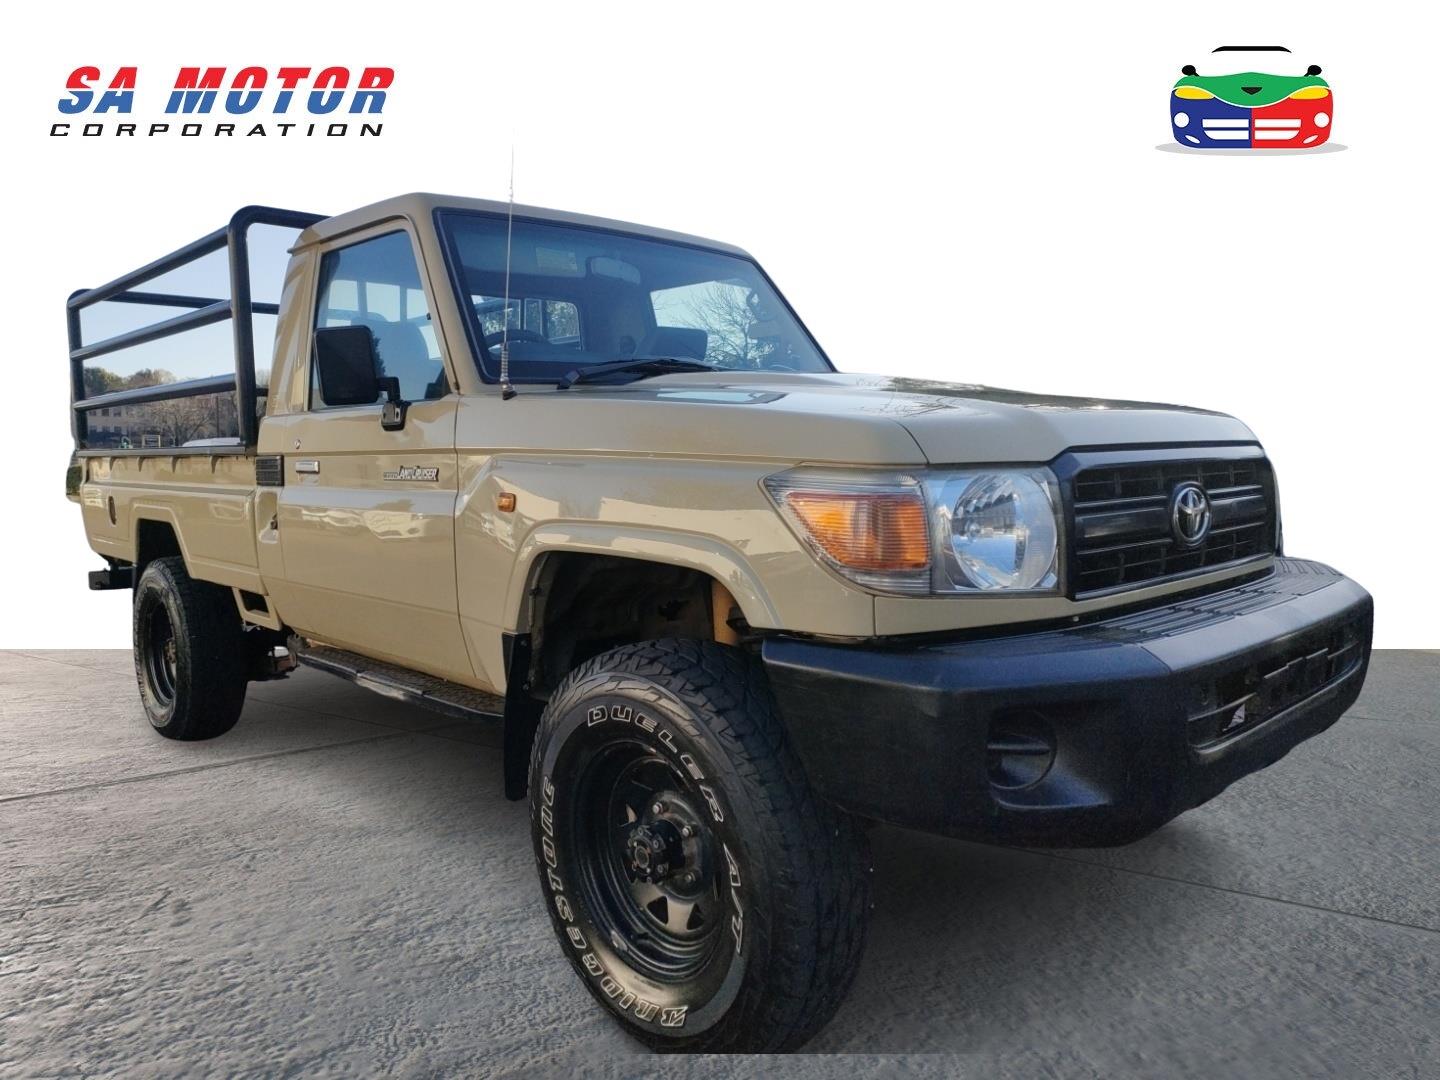 2010 Toyota Land Cruiser 79 4.0 Pick-Up for sale - 330393